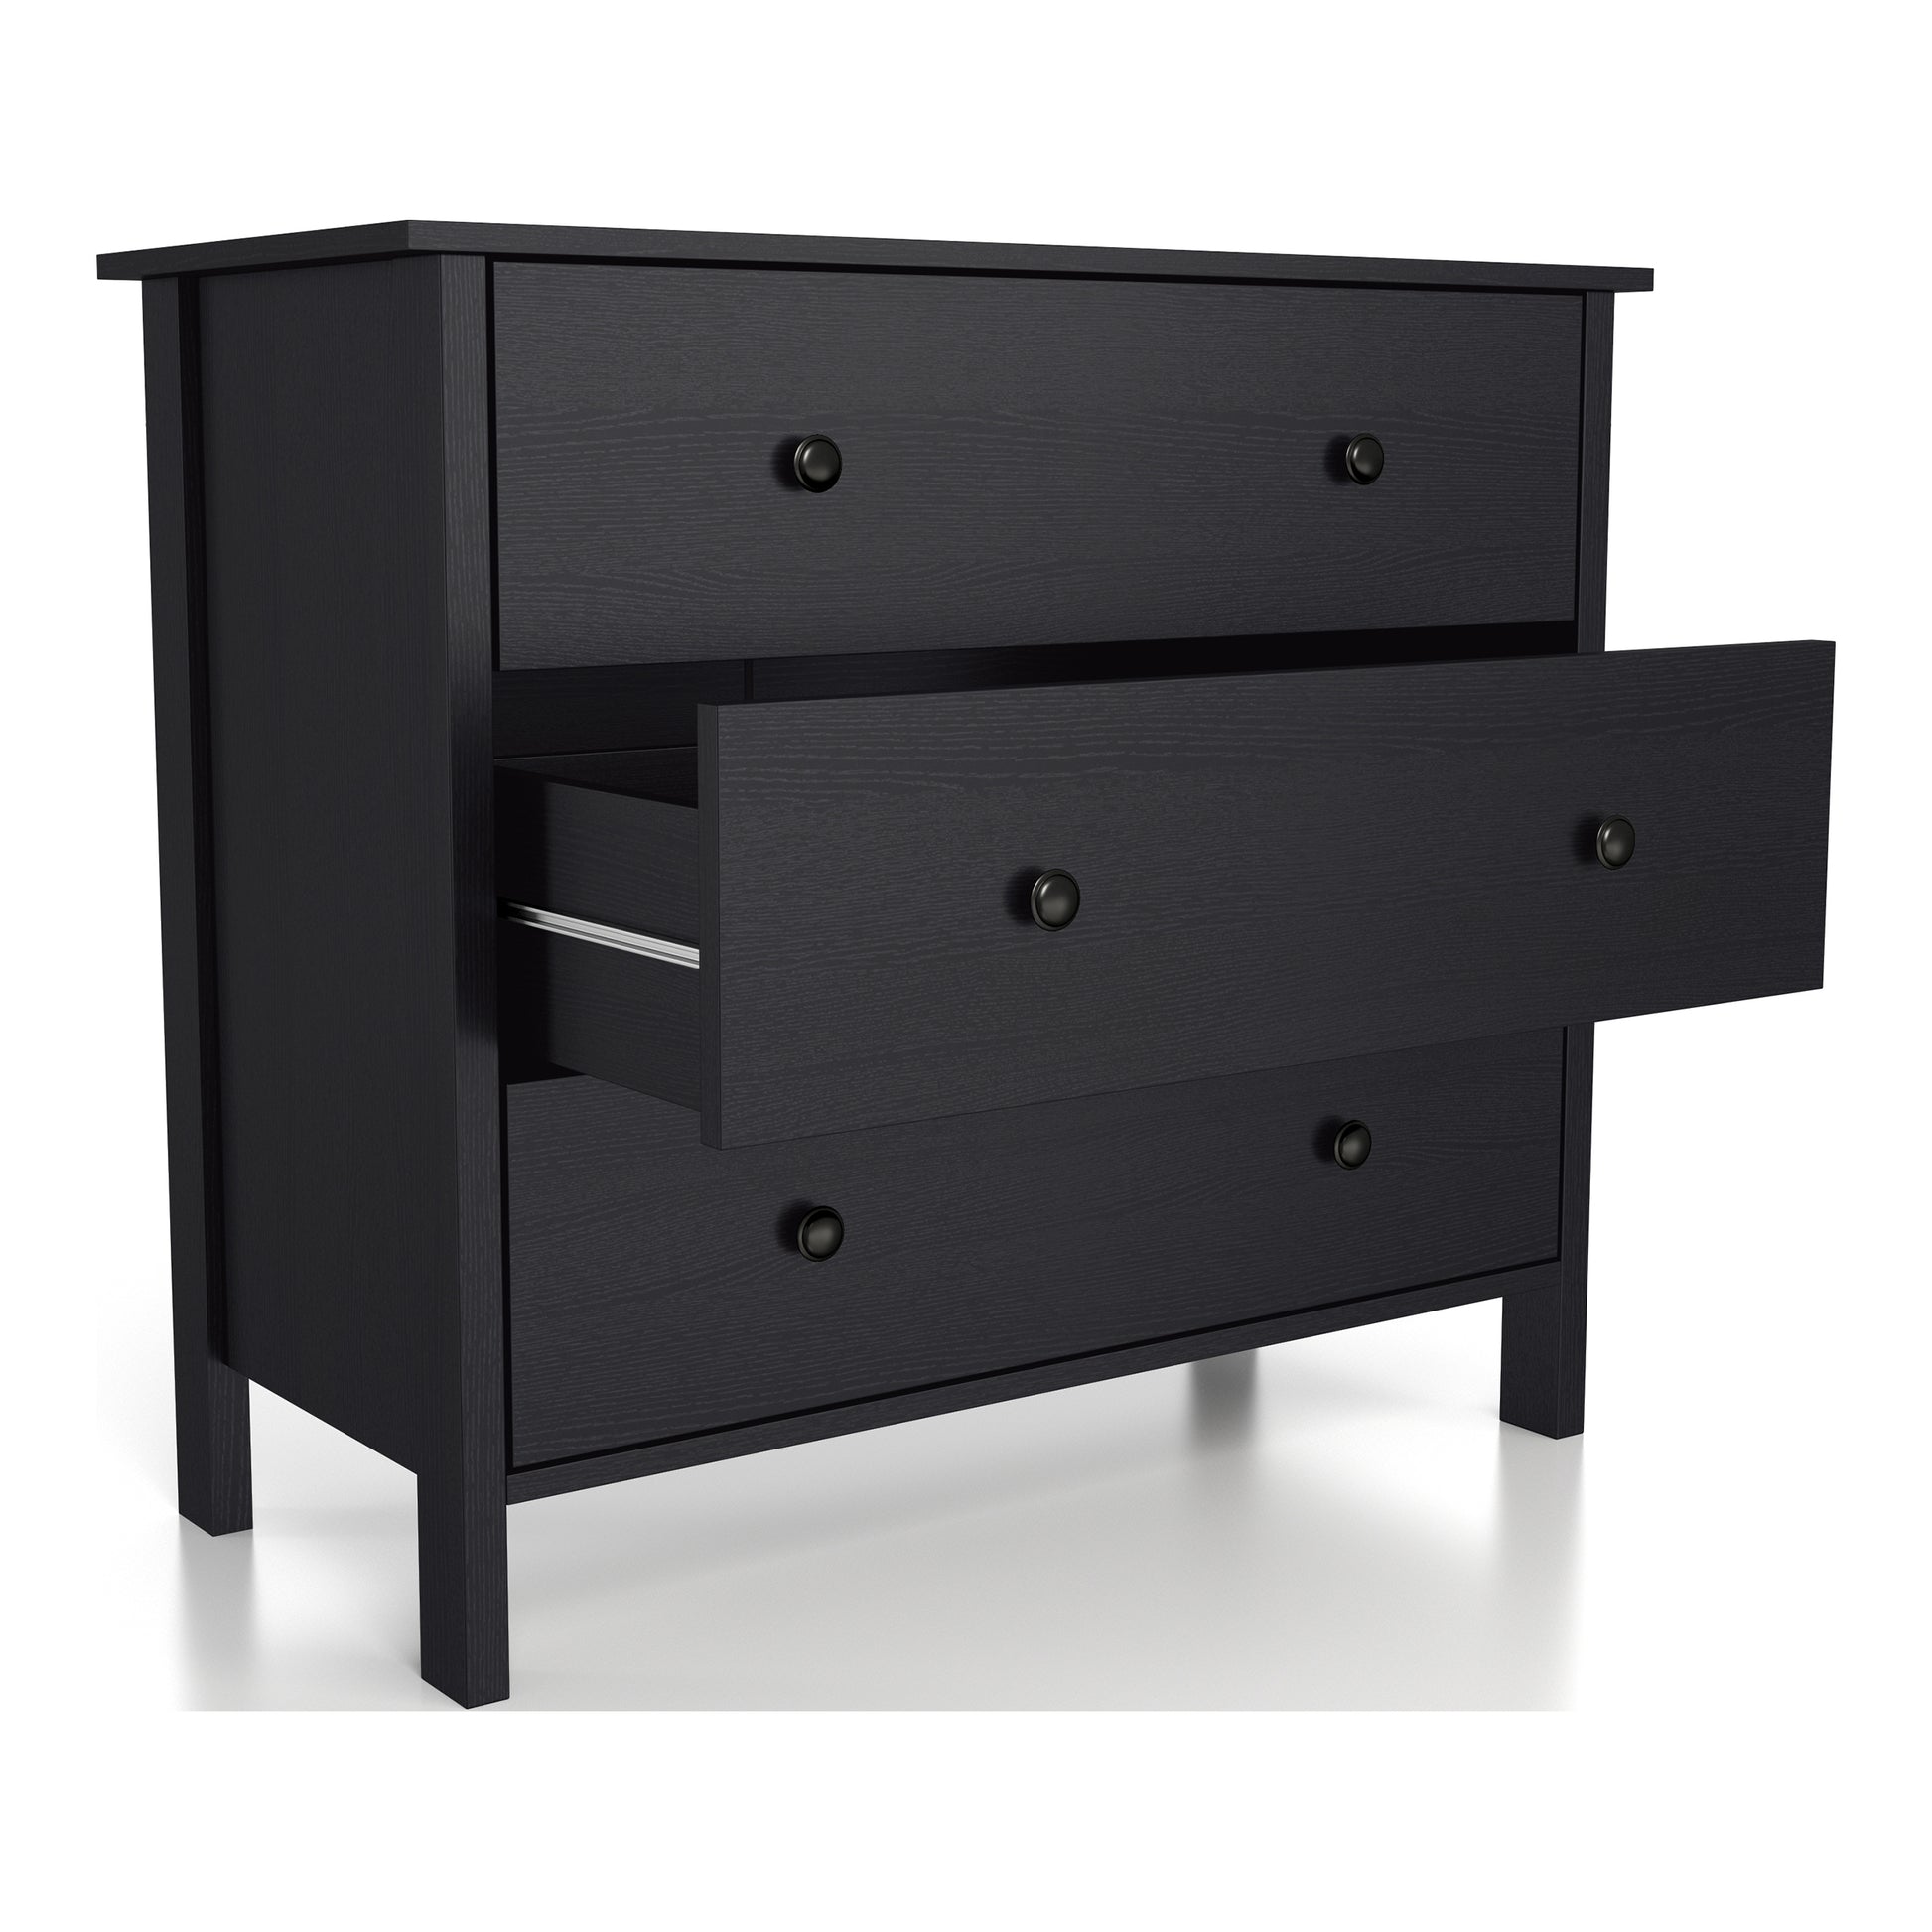 Right angled transitional black three-drawer youth dresser with middle drawer open on a white background